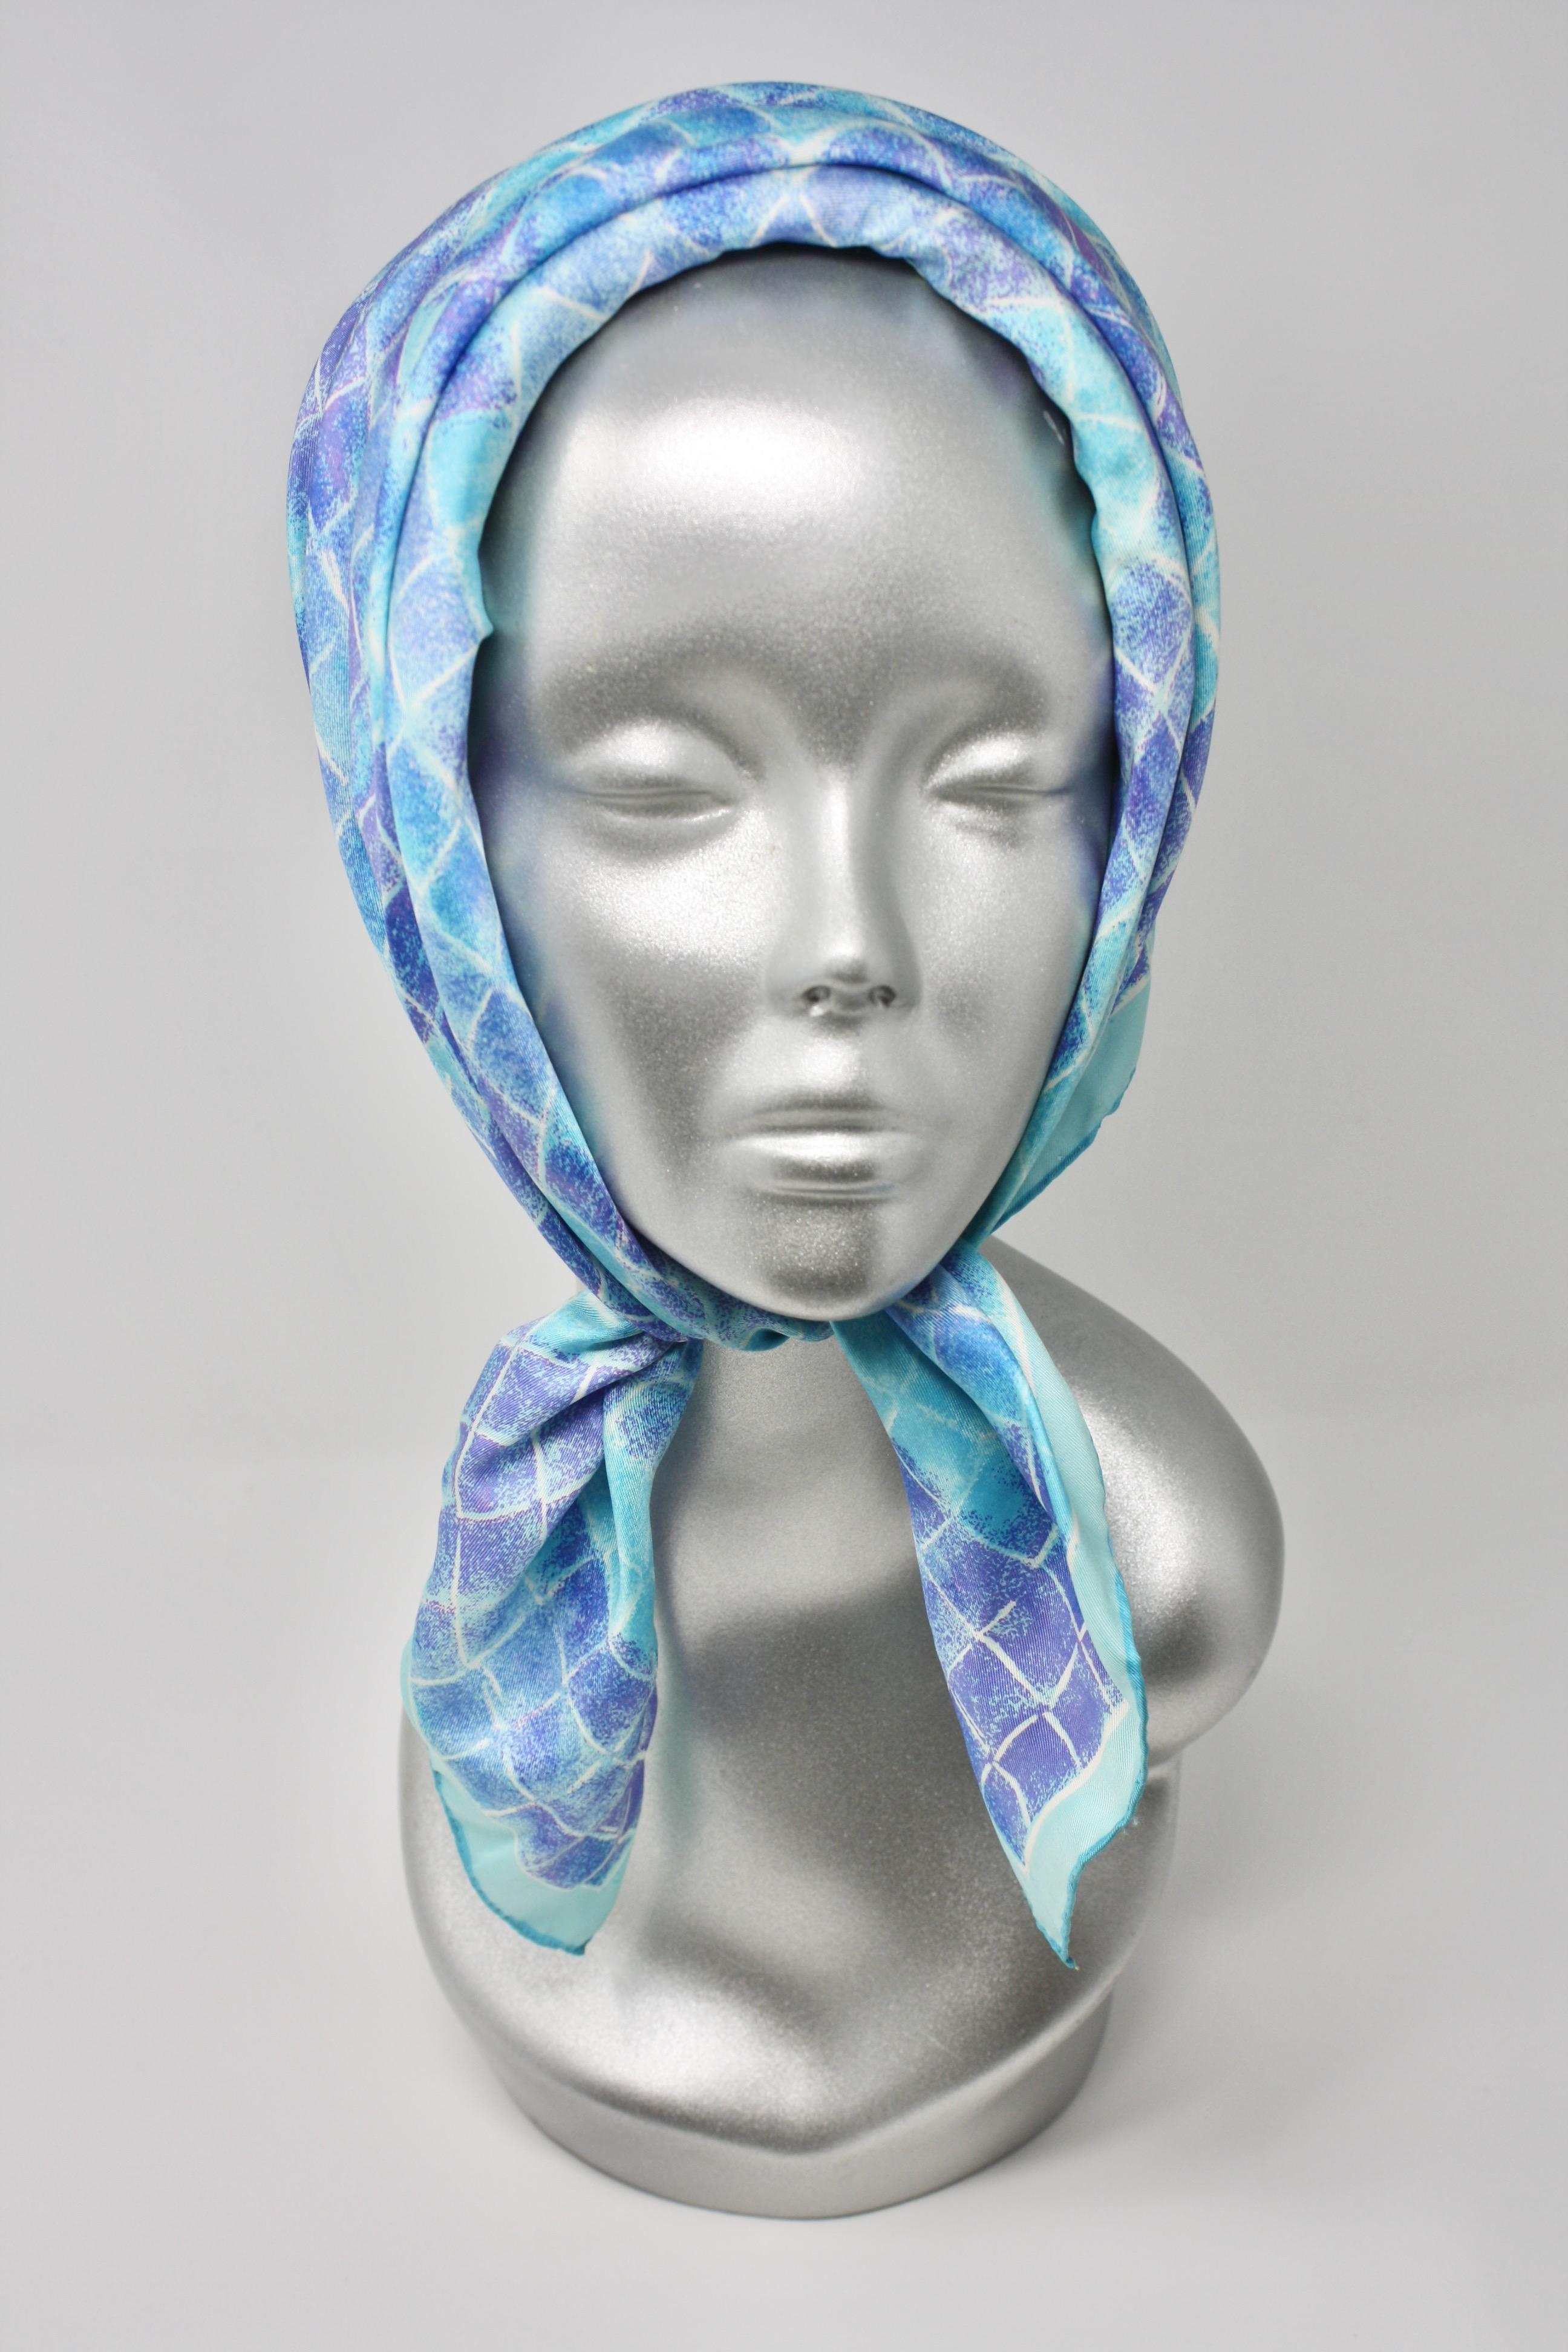 Rare Vintage 60's CHRISTIE Couture Blue & Turquoise Silk Scarf Hat!  Very Jackie O!  These Christie pieces are very hard to find and I was only able to find one documented piece online.  I have included a picture from the December 1963 issue of